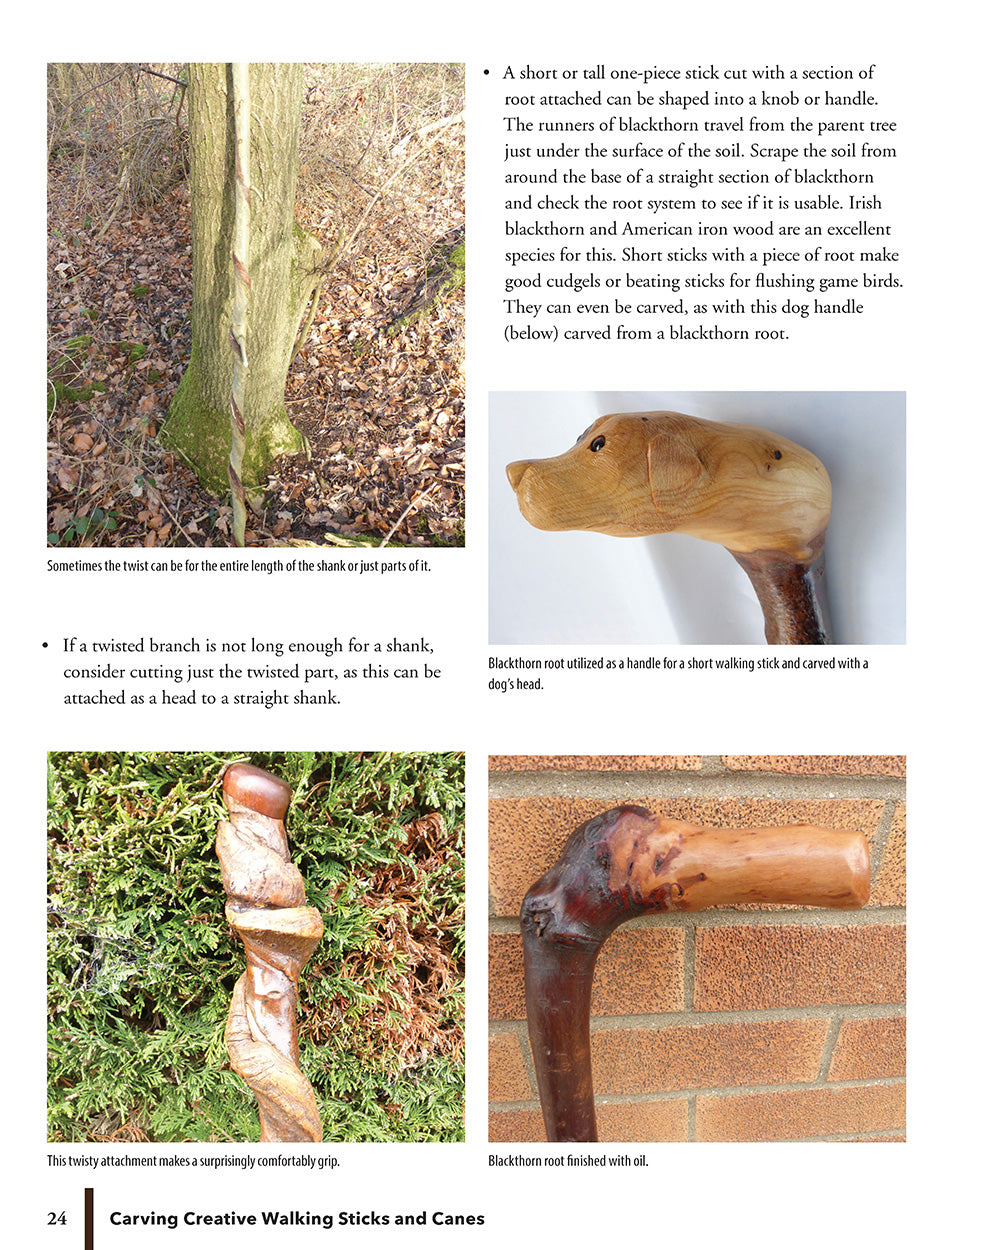 Carving Creative Walking Sticks and Canes